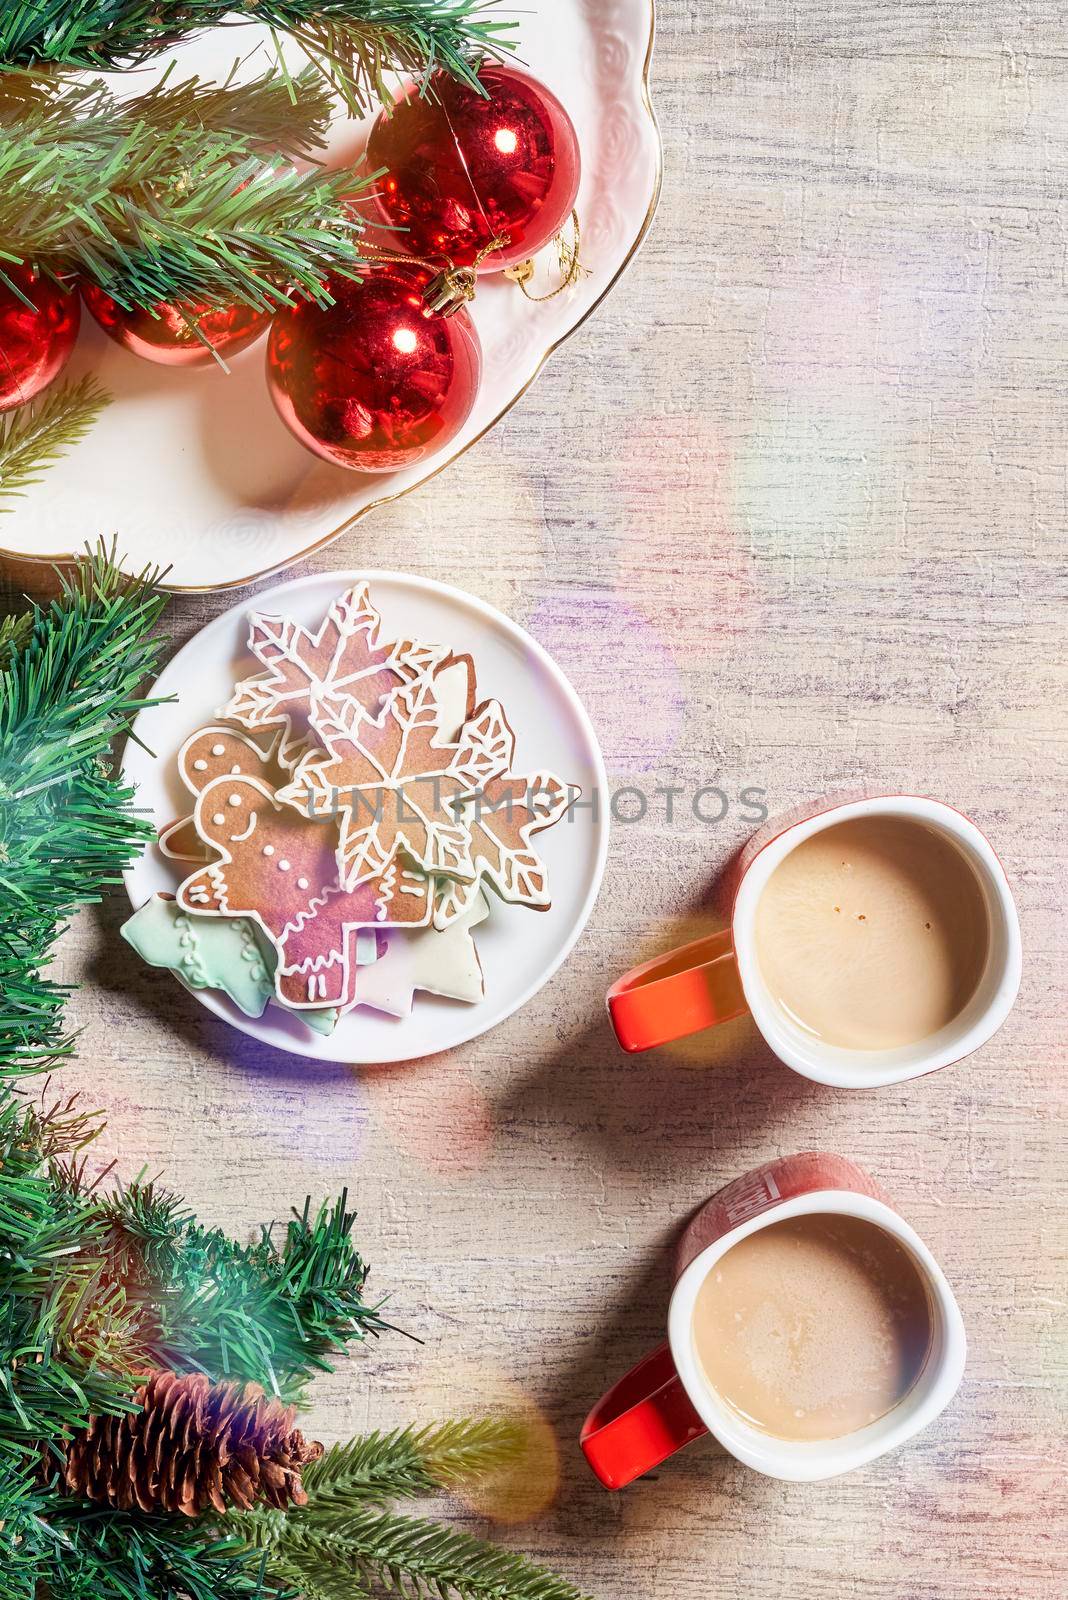 Merry Christmas background with Xmas decors and cookies by golibtolibov